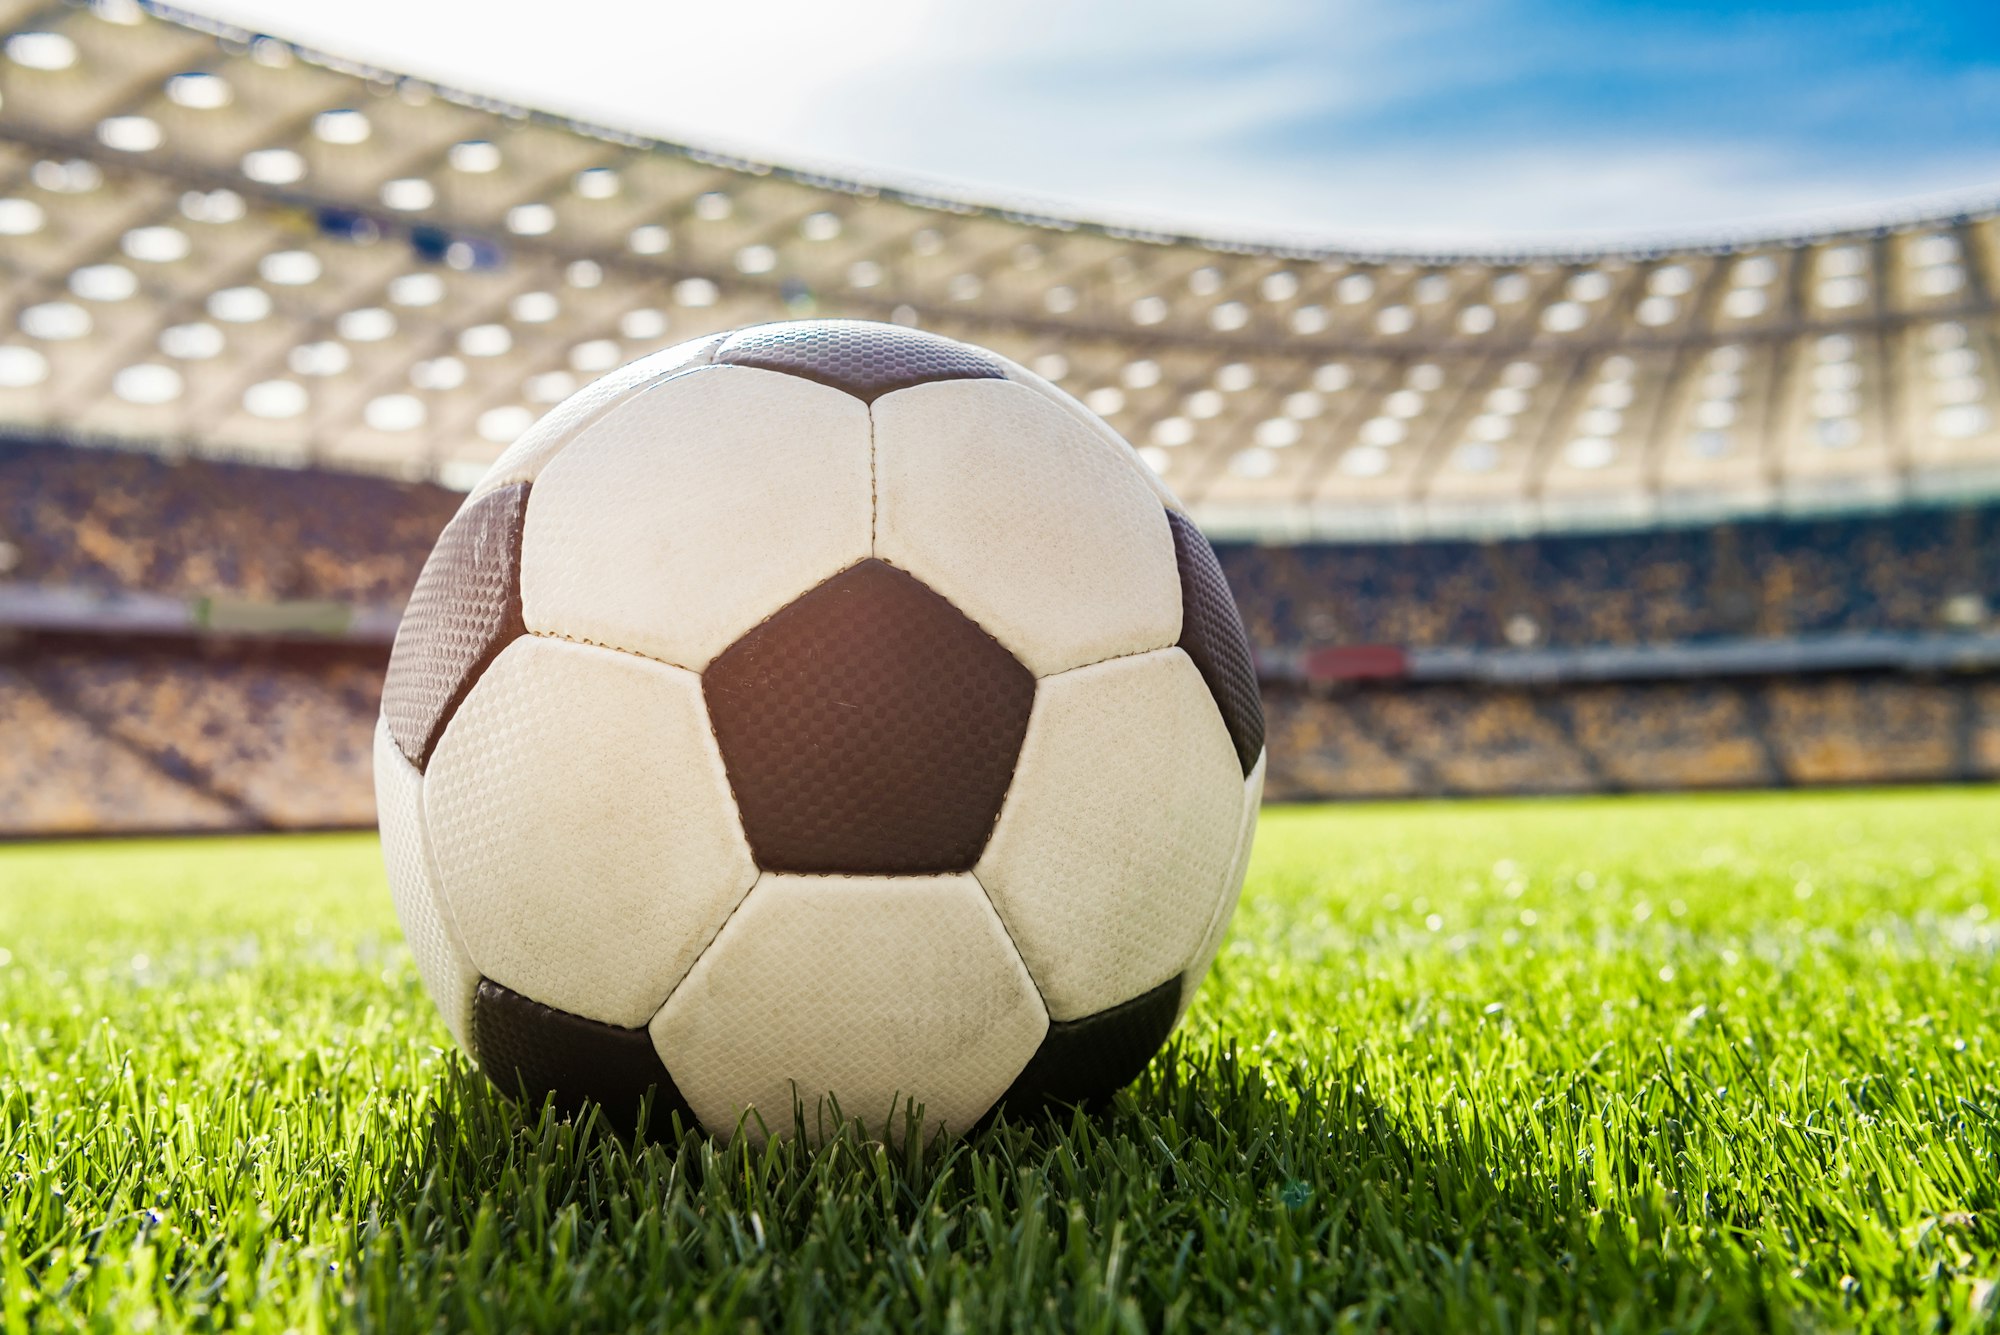 close up view of soccer ball on grass on soccer field stadium